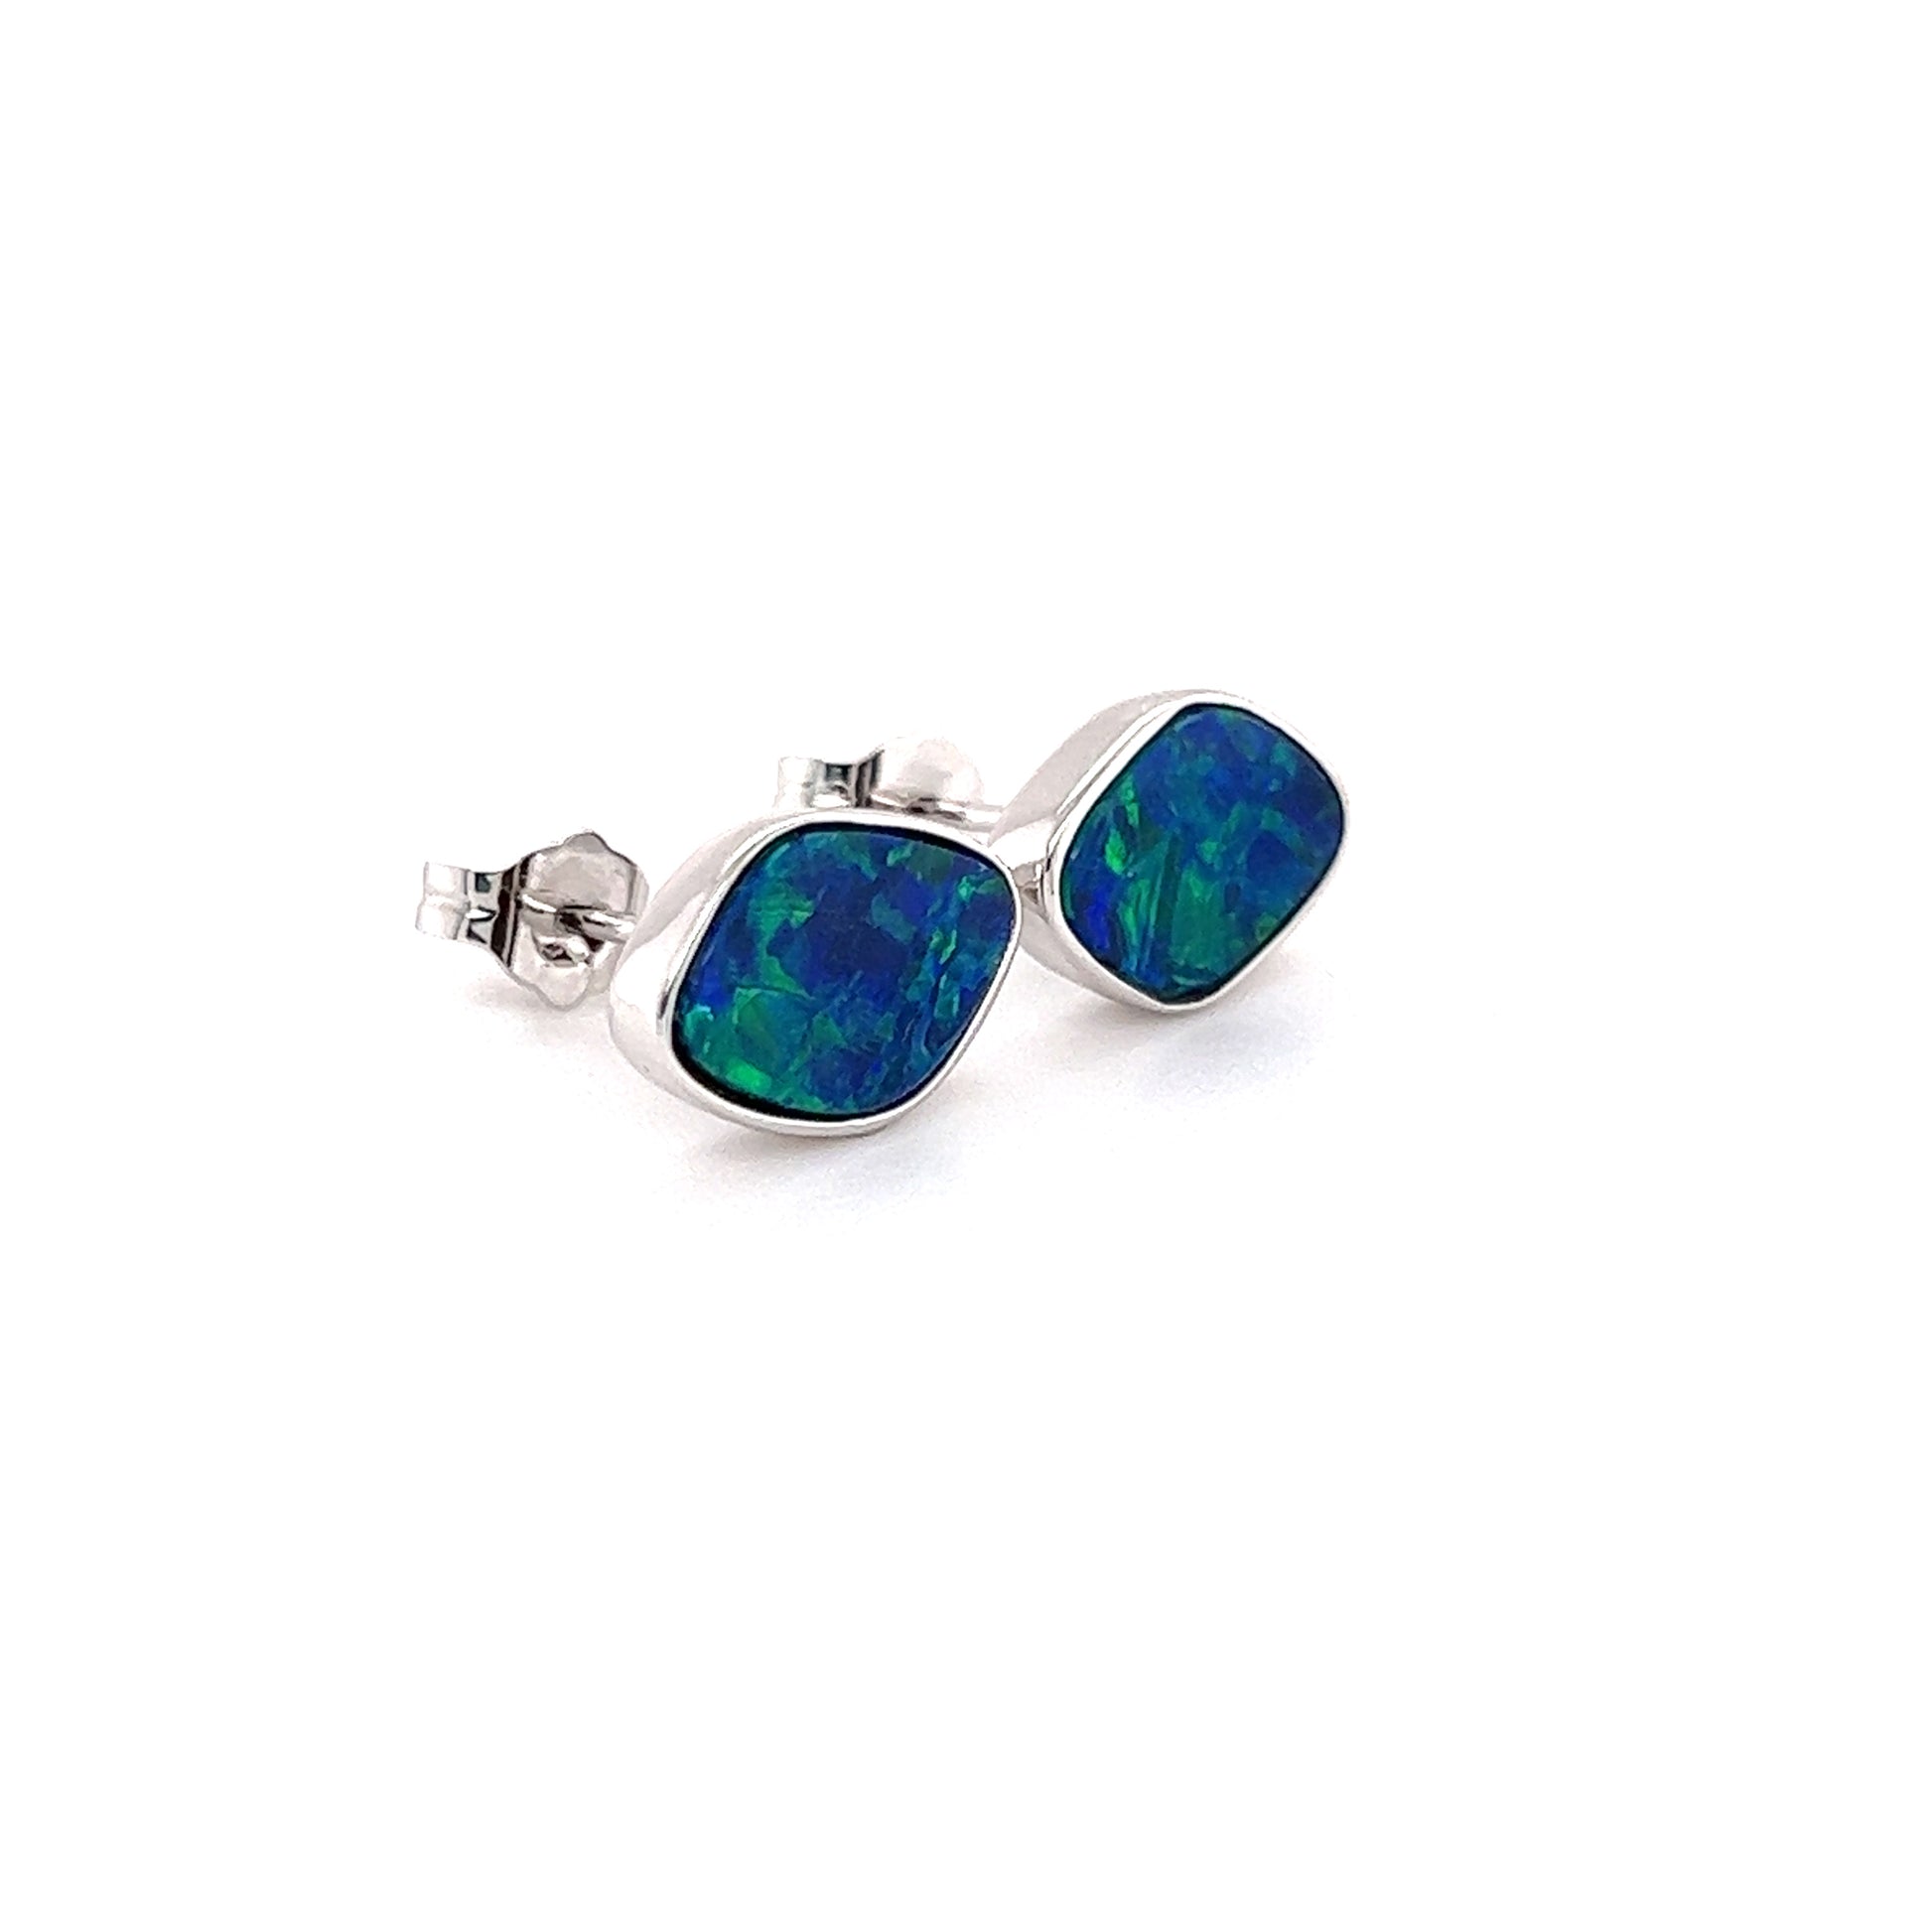 Black Opal Stud Earrings with 2.79ctw of Opal in 14K White Gold Left Side View